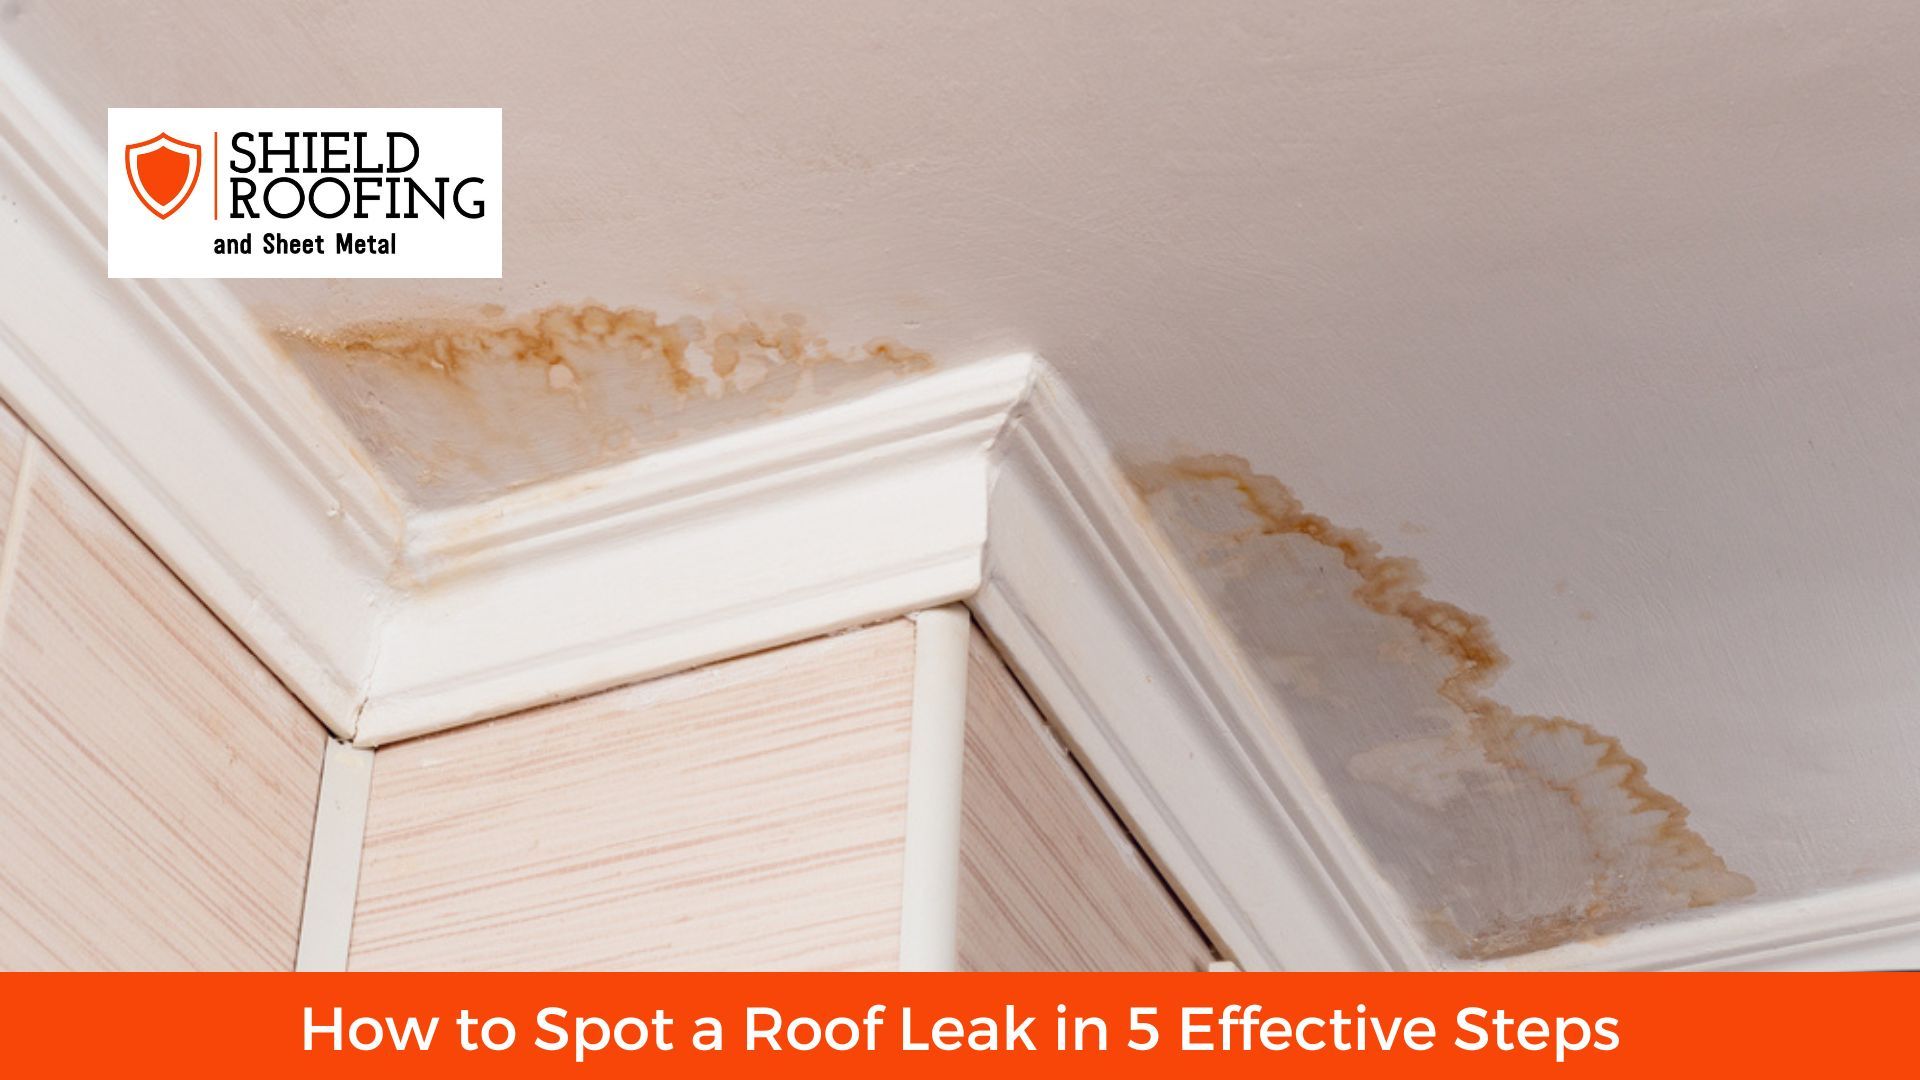 How to Spot a Roof Leak